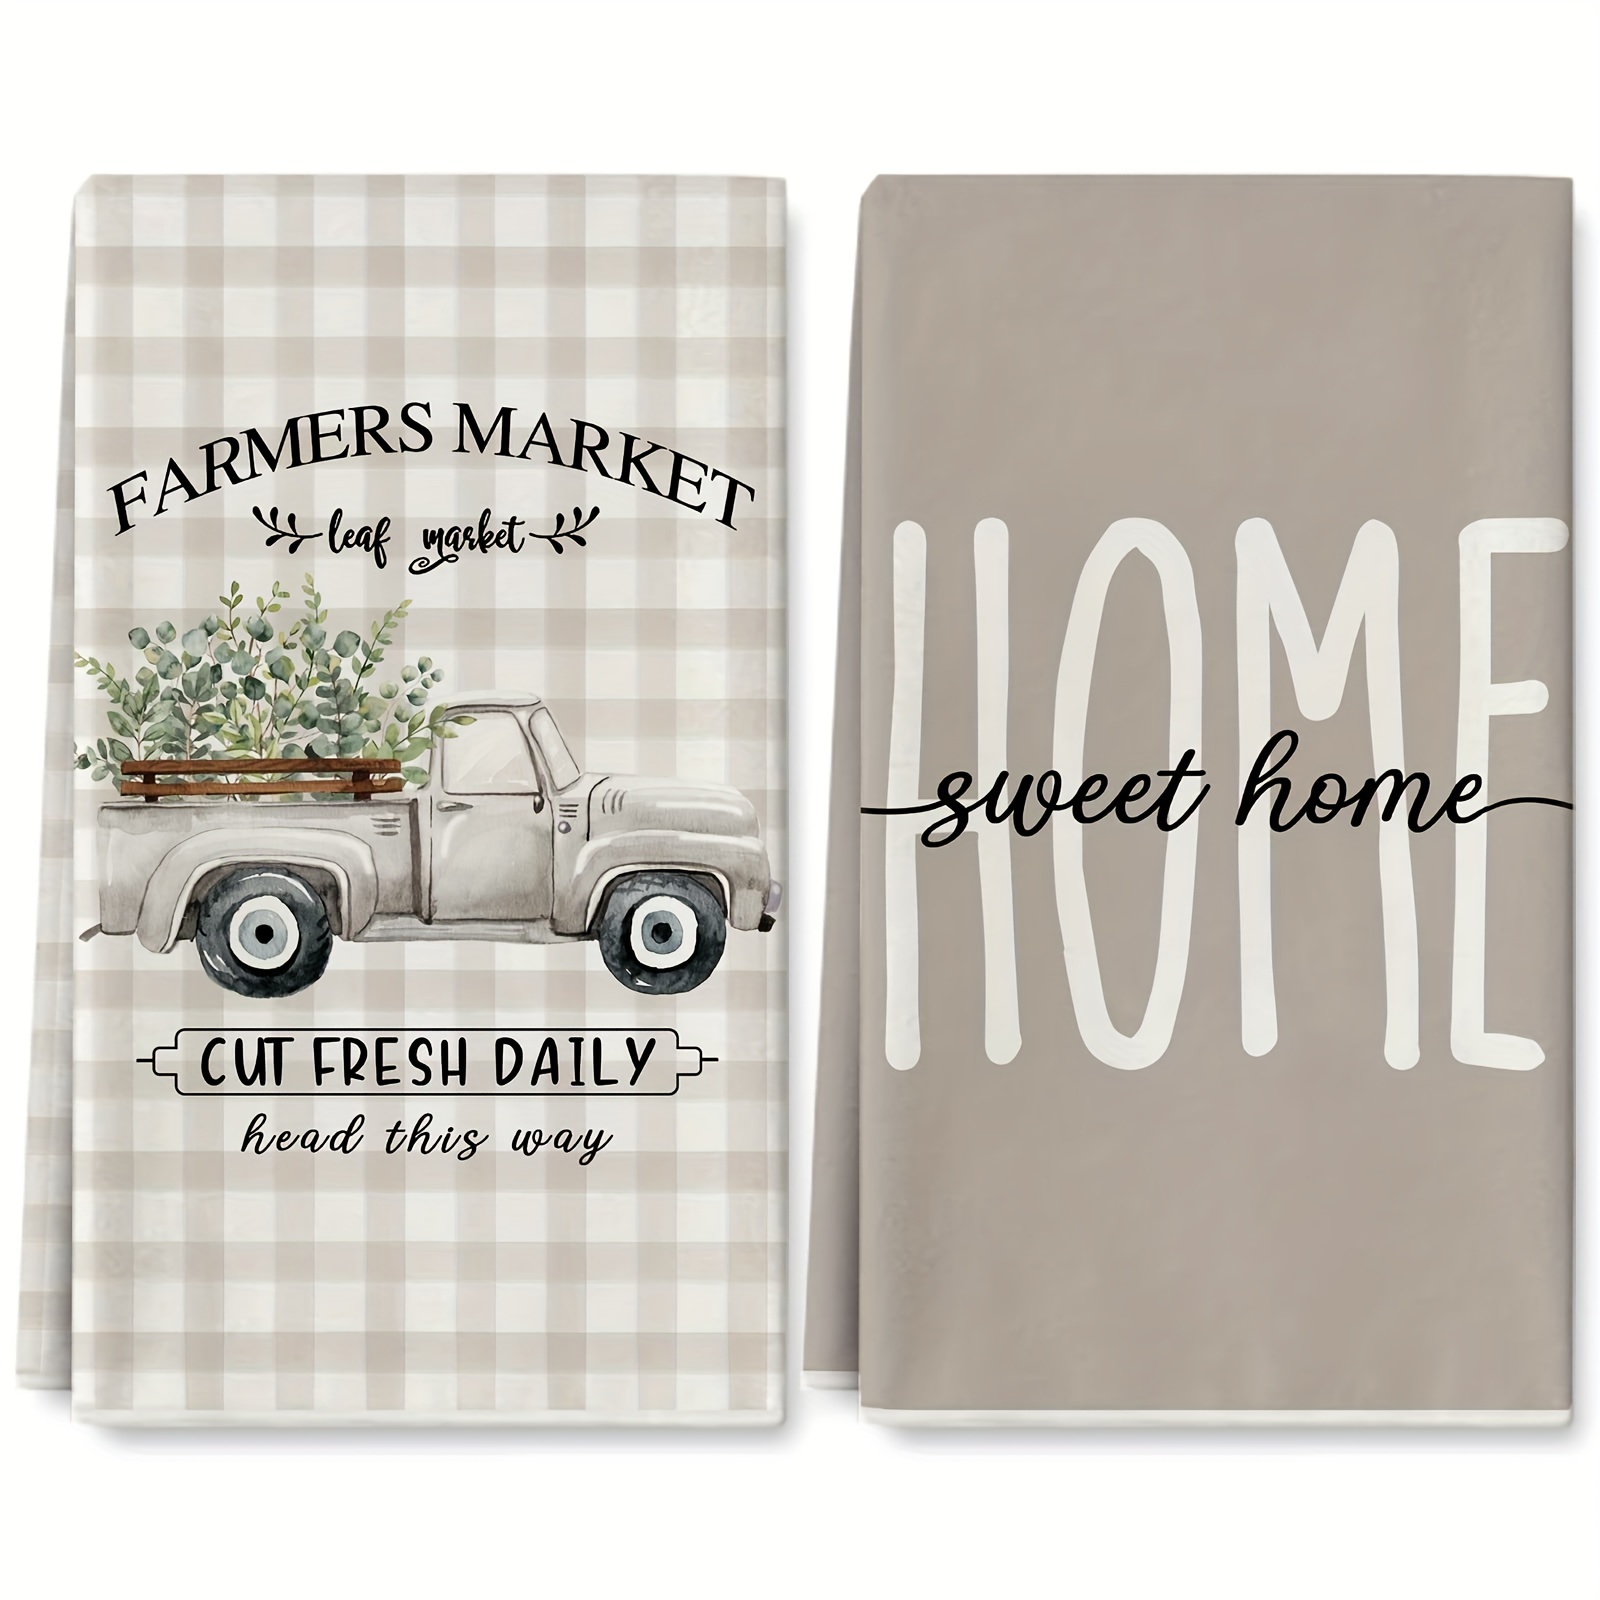 

2pcs Dishcloths, Farmhouse Kitchen Towel, Gray Home Sweet Home Dish Towel Buffalo Plaids Truck Eucalyptus Leaves Hand Drying Tea Towel, For Home Cooking, Baking And Cleaning, Kitchen Supplies